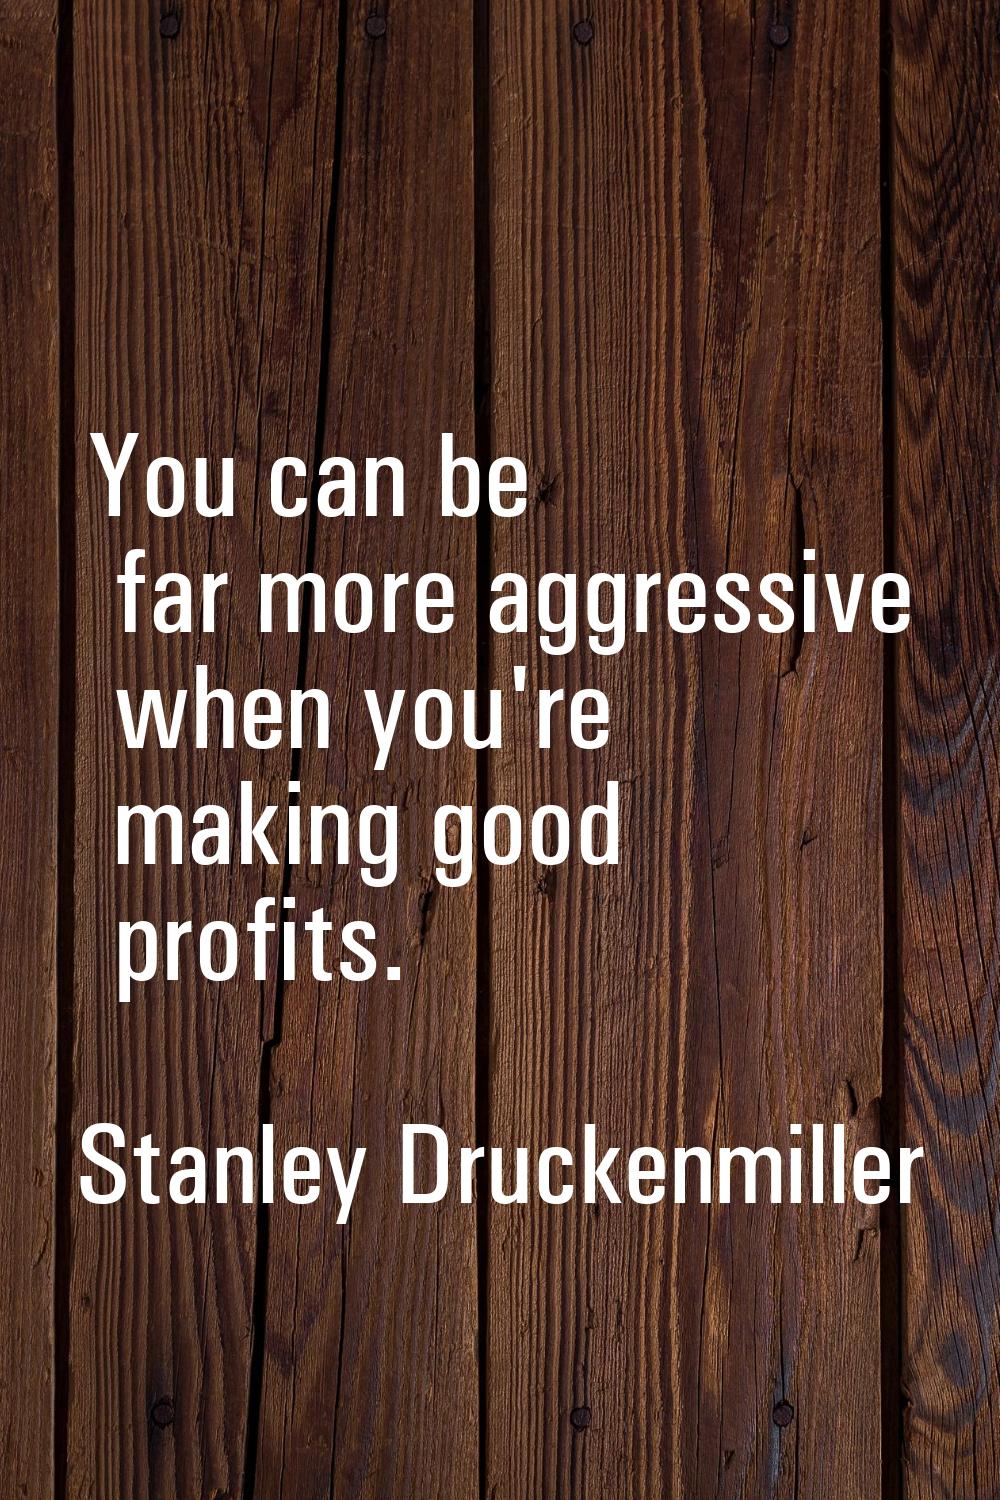 You can be far more aggressive when you're making good profits.